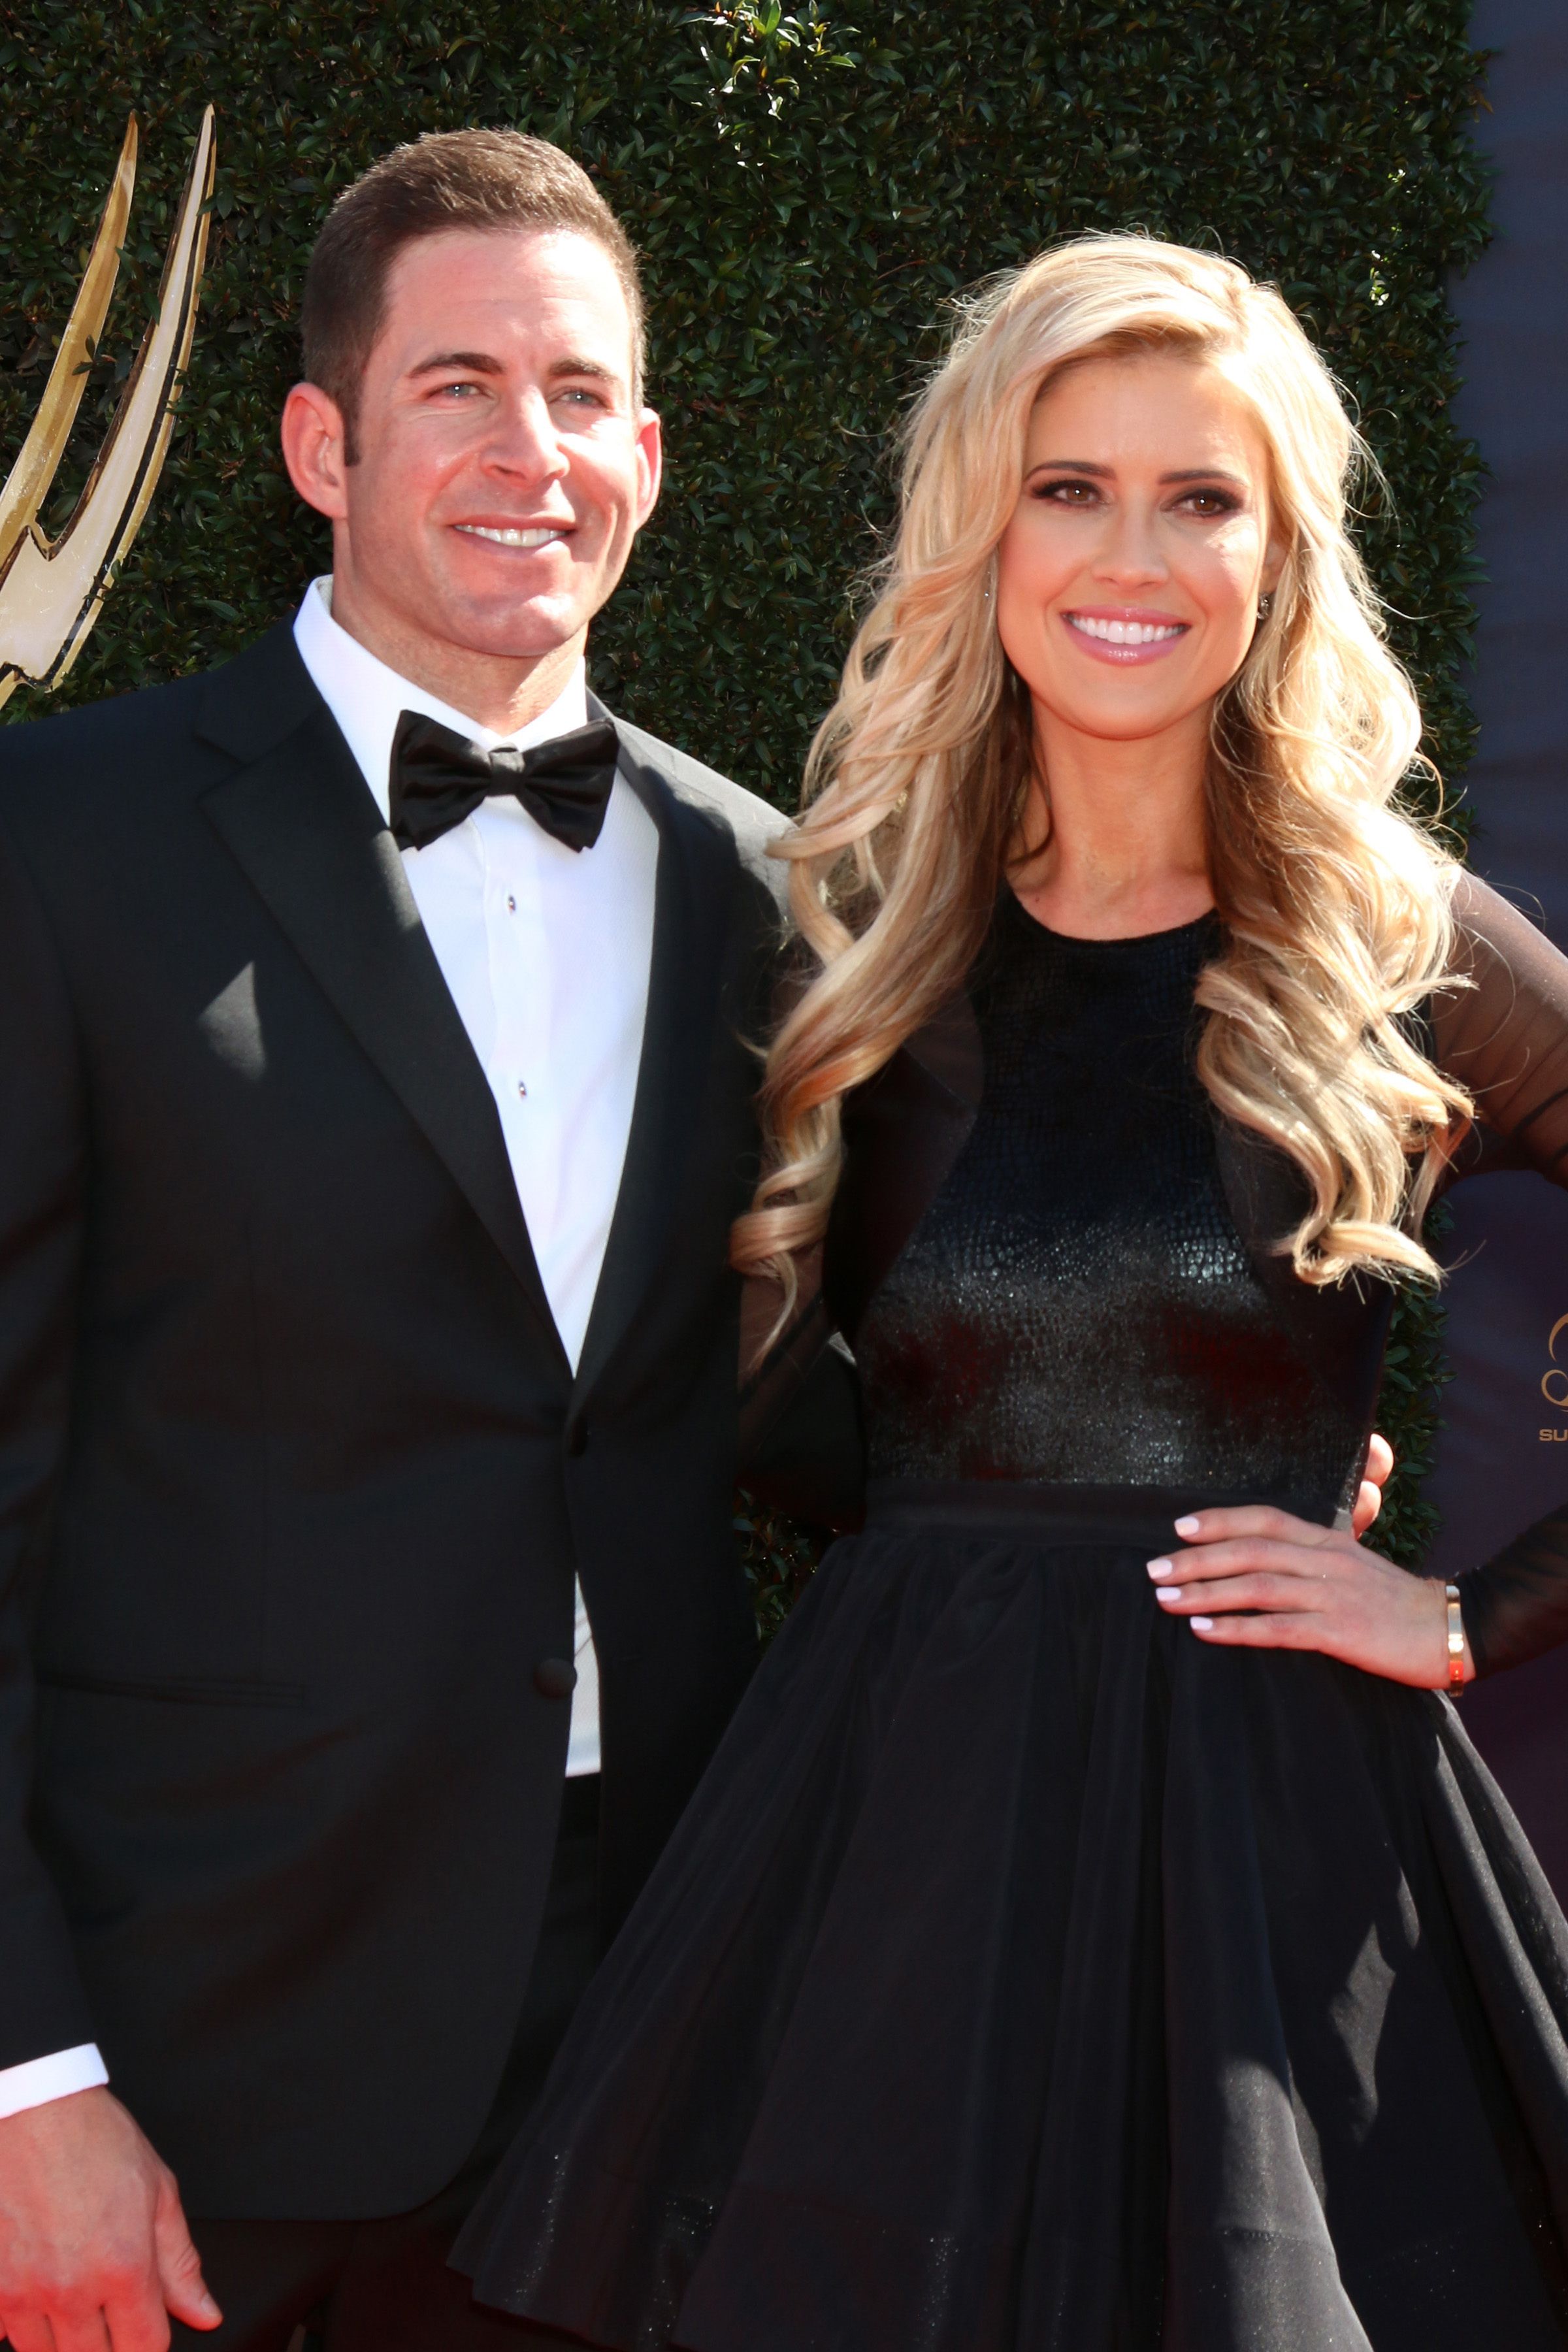 Tarek and Christina El Moussa at the 44th Daytime Emmy Awards on April 30, 2017, in Pasadena, California | Photo: Shutterstock/Kathy Hutchins